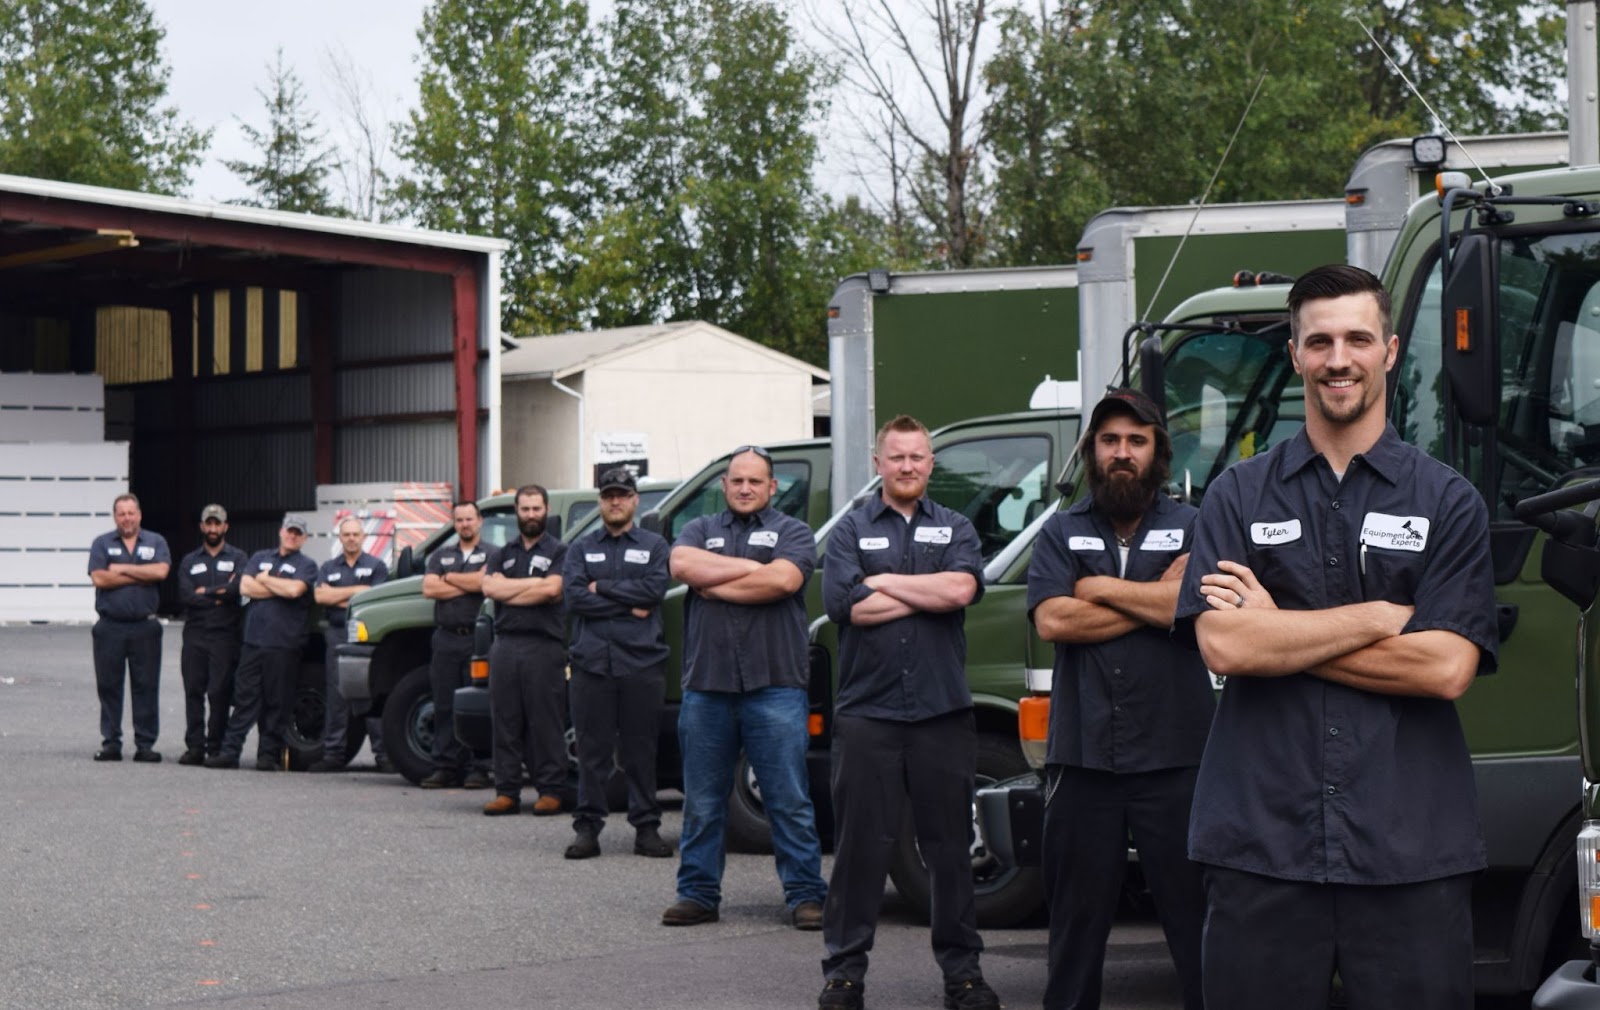 The Equipment Experts, Inc. team in a diagonal line, each person standing with arms folded against a different truck